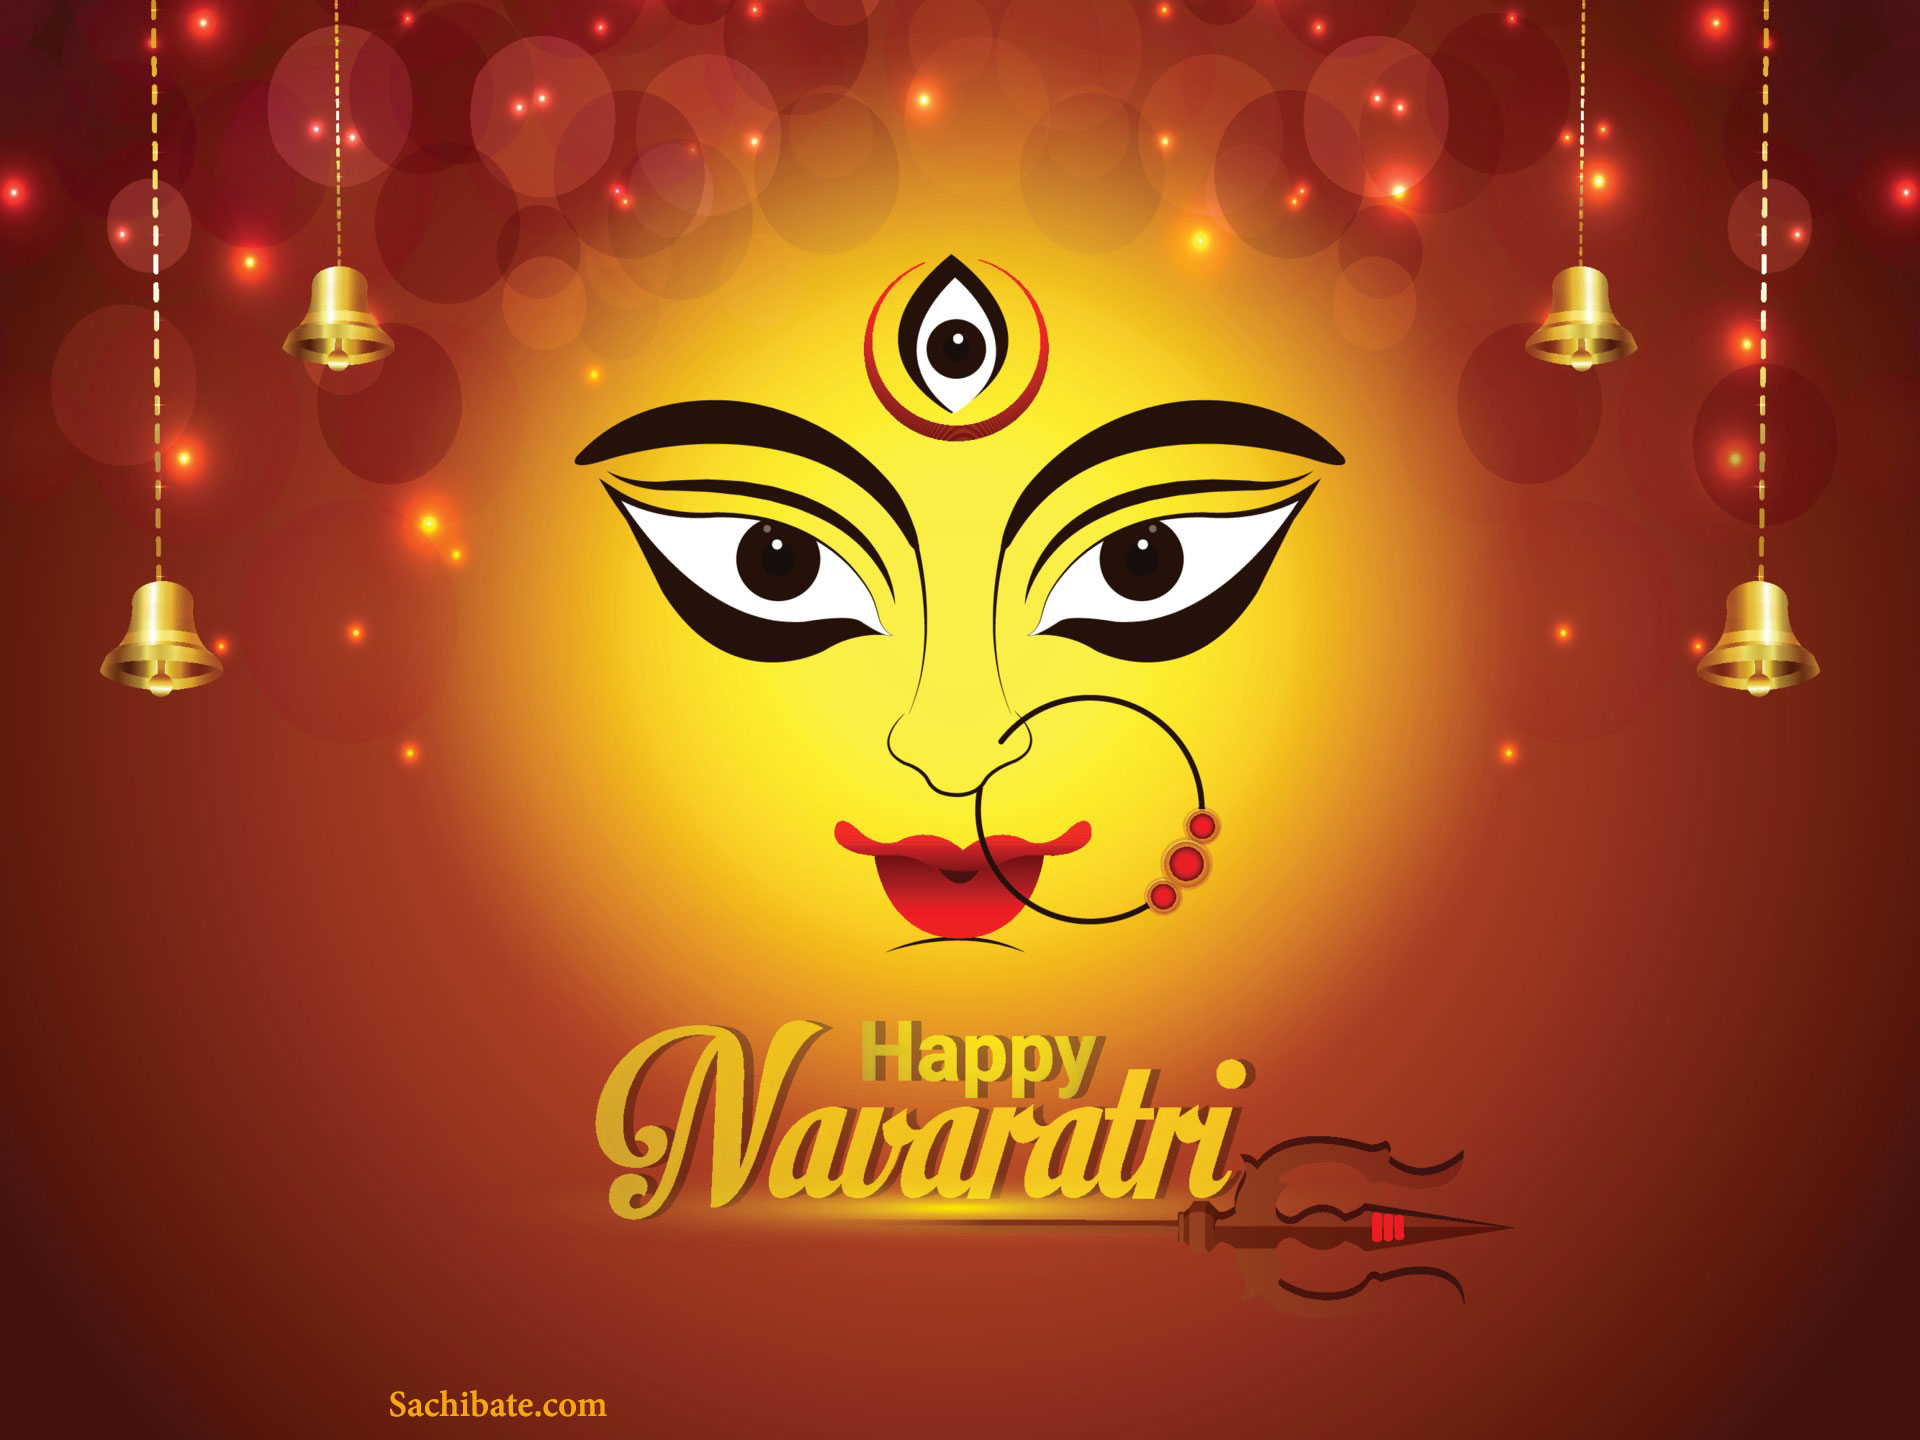 Happy Navratri Wallpapers  Top Free Happy Navratri Backgrounds   WallpaperAccess